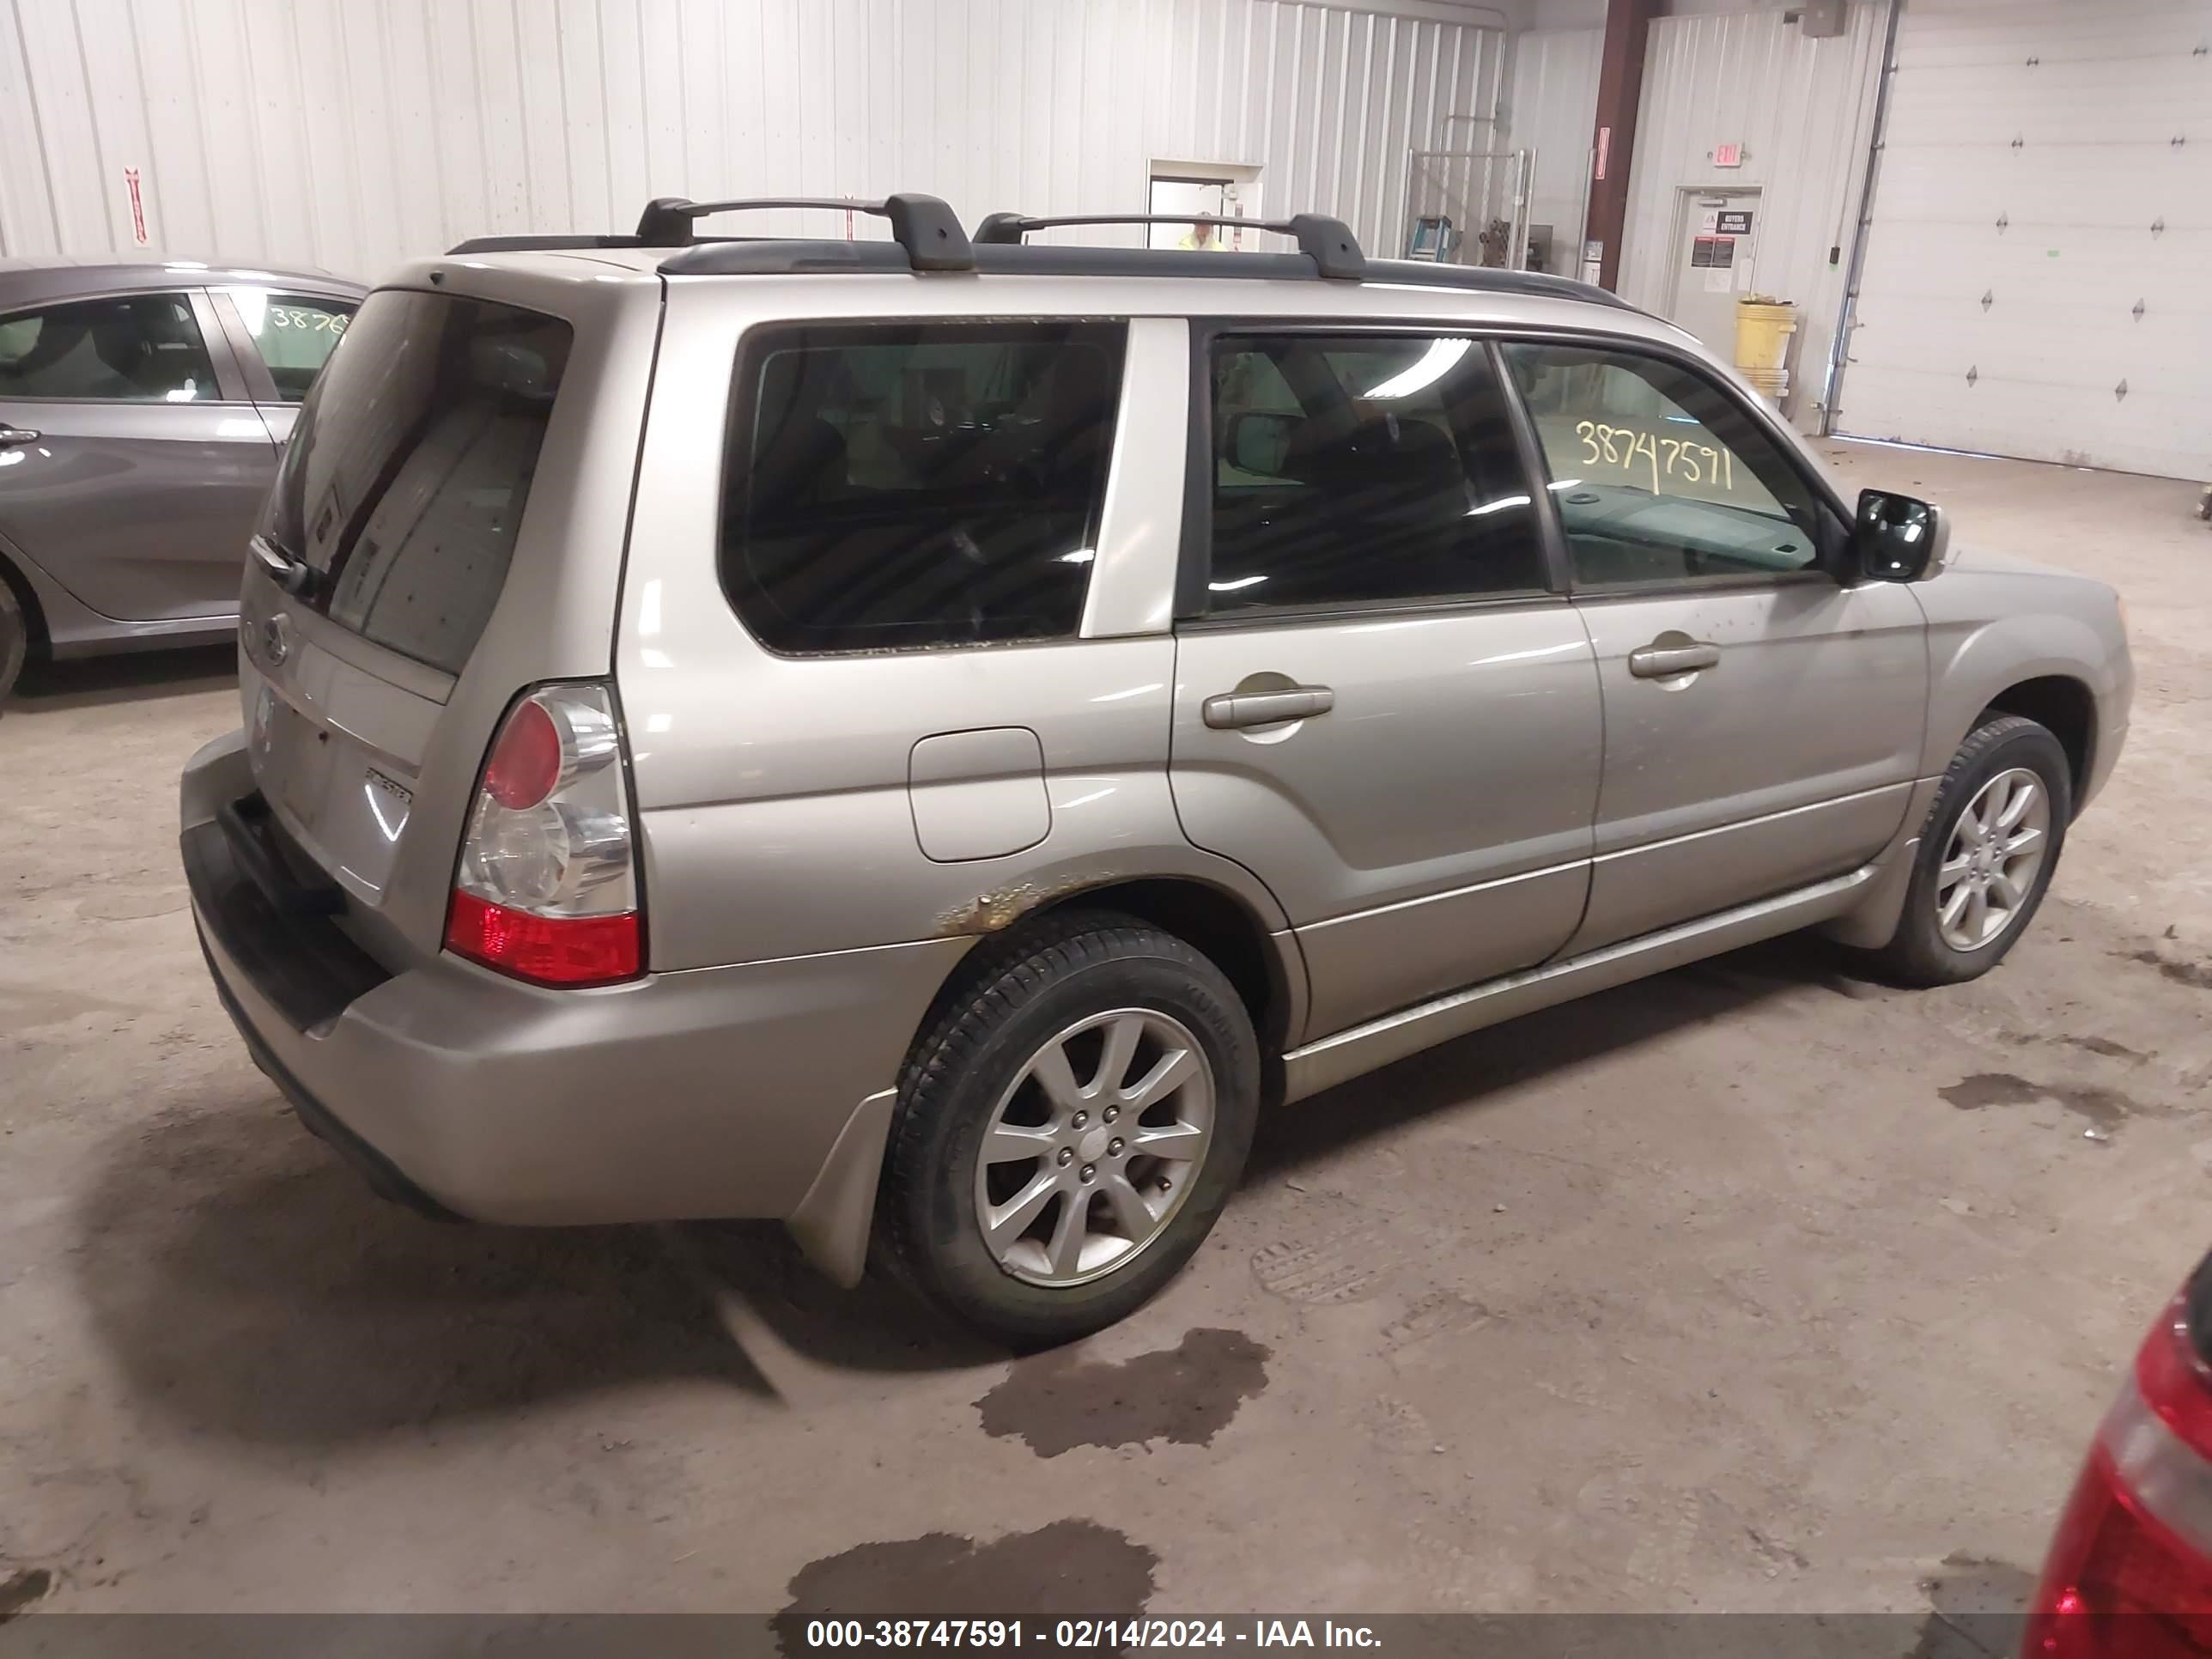 JF1SG65656H710533  - SUBARU FORESTER  2006 IMG - 3